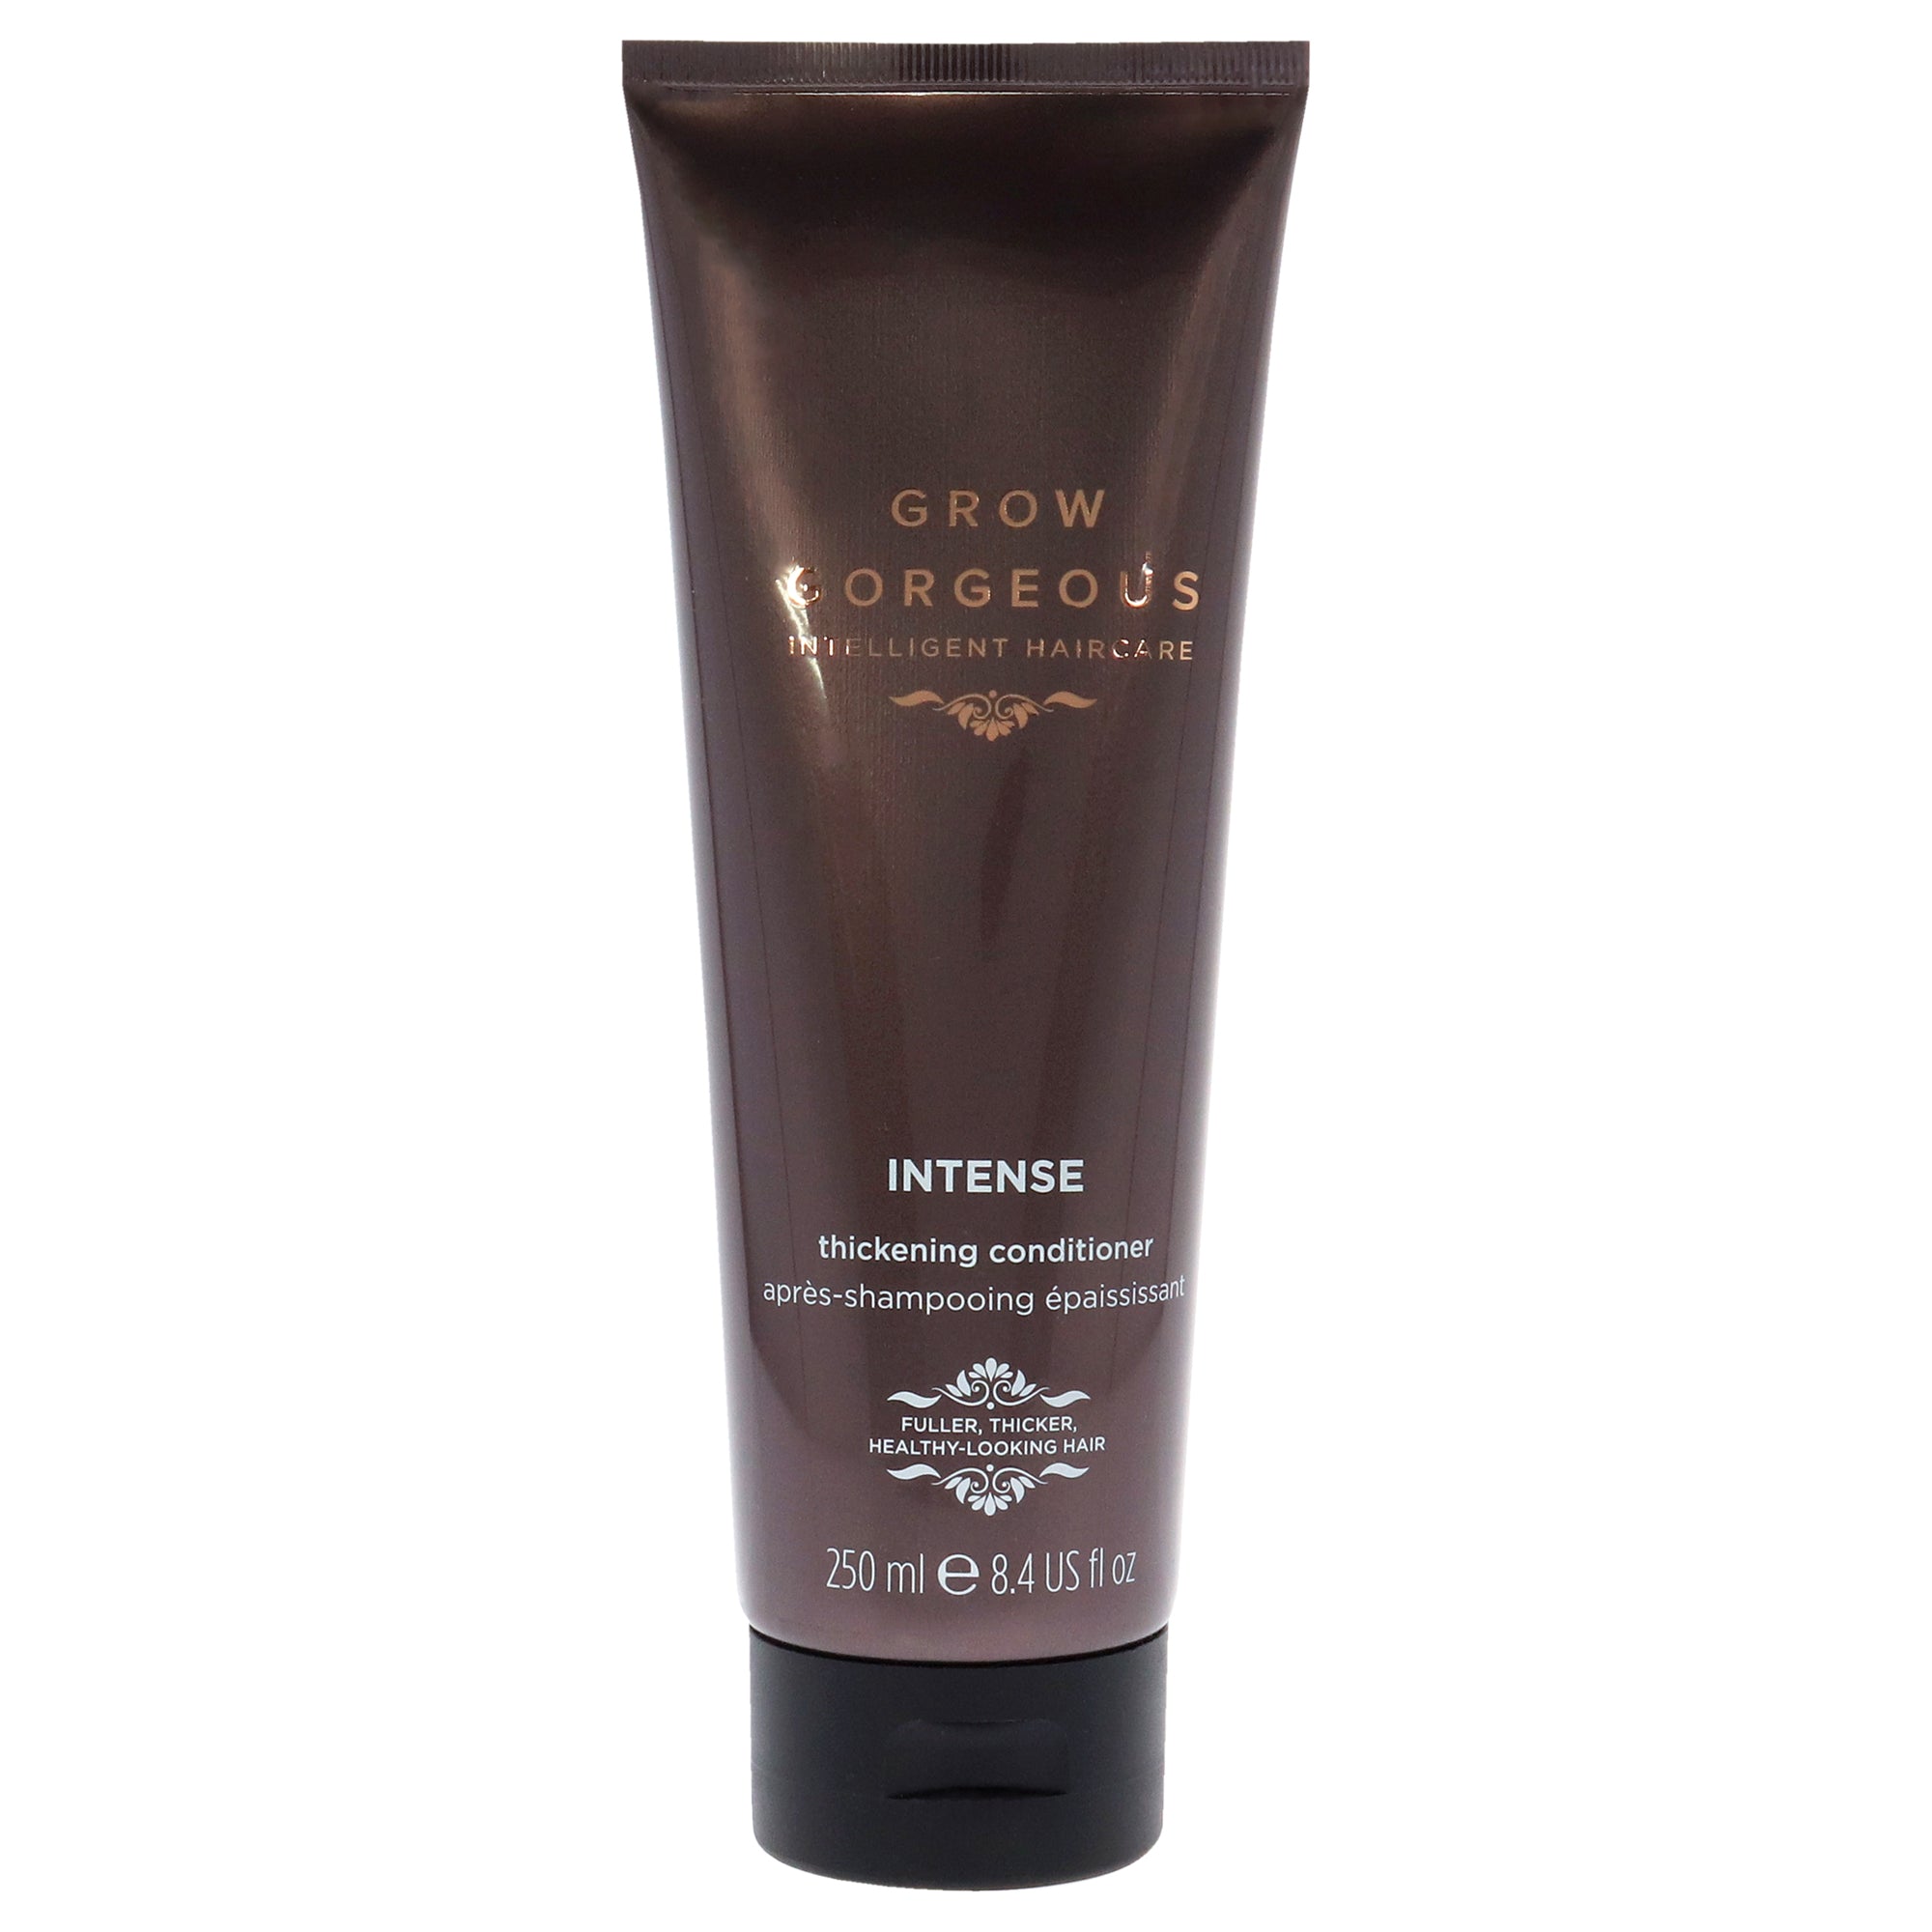 Intense Thickening Conditioner by Grow Gorgeous for Unisex - 8.4 oz Conditioner 8.4 oz unisex